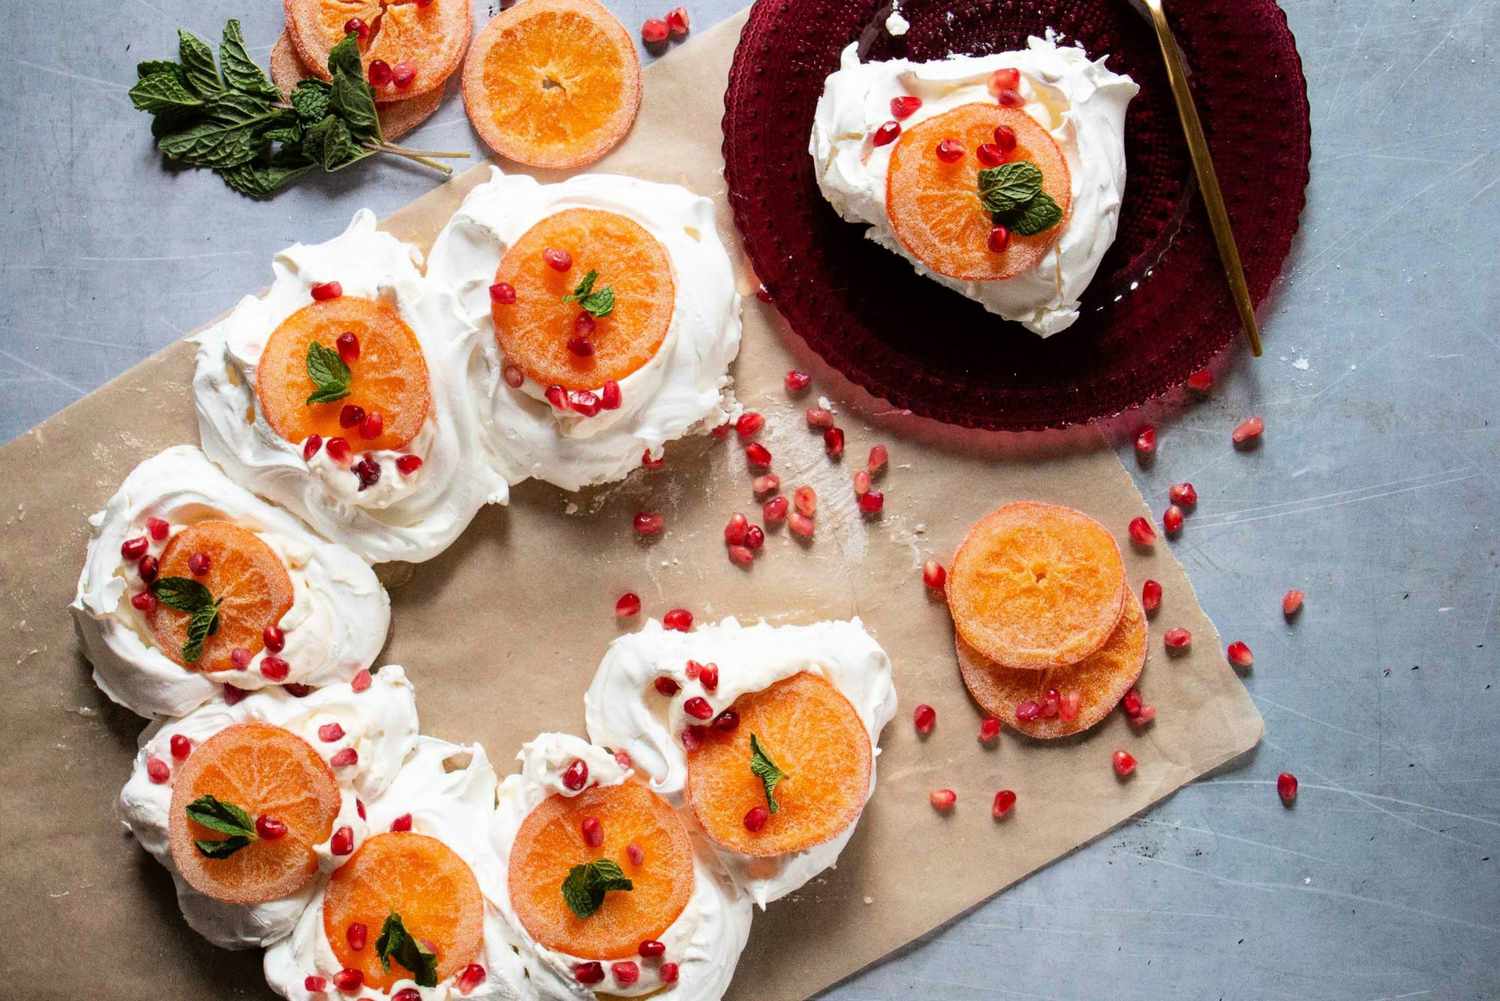 Pavlova wreath topped with lemon curd, candied citrus, pomegranate seeds, and mint leaves